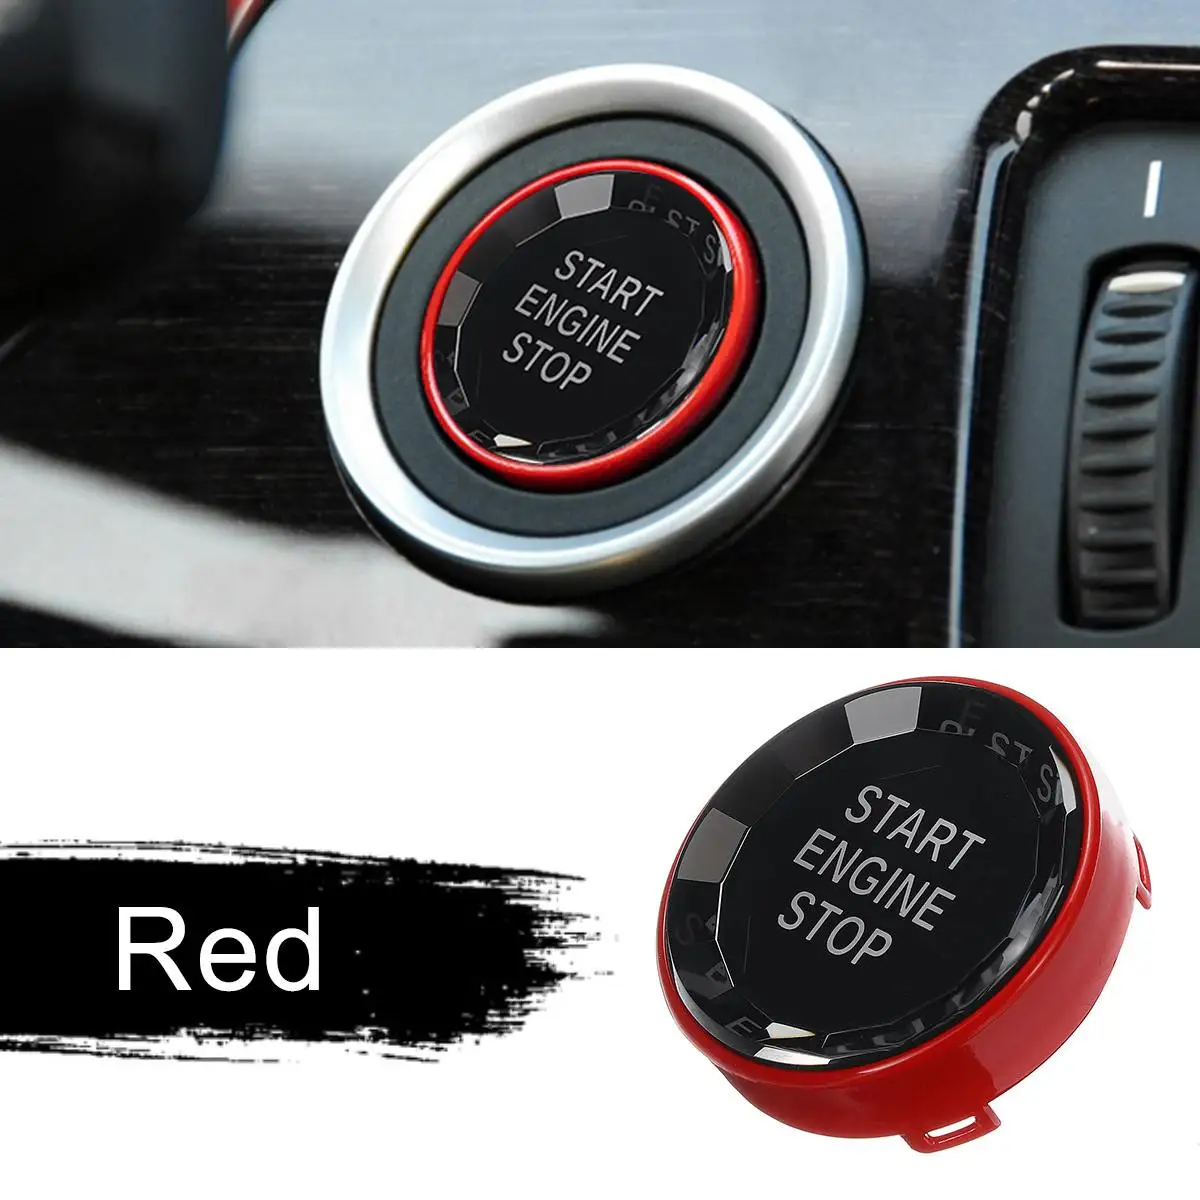 

Car Engine Start Stop Switch Crystal Button For BMW E Chassis E60 E84 E83 E90 E91 E92 E93 E70 E70 E71 E72 E89 Cover Sticker